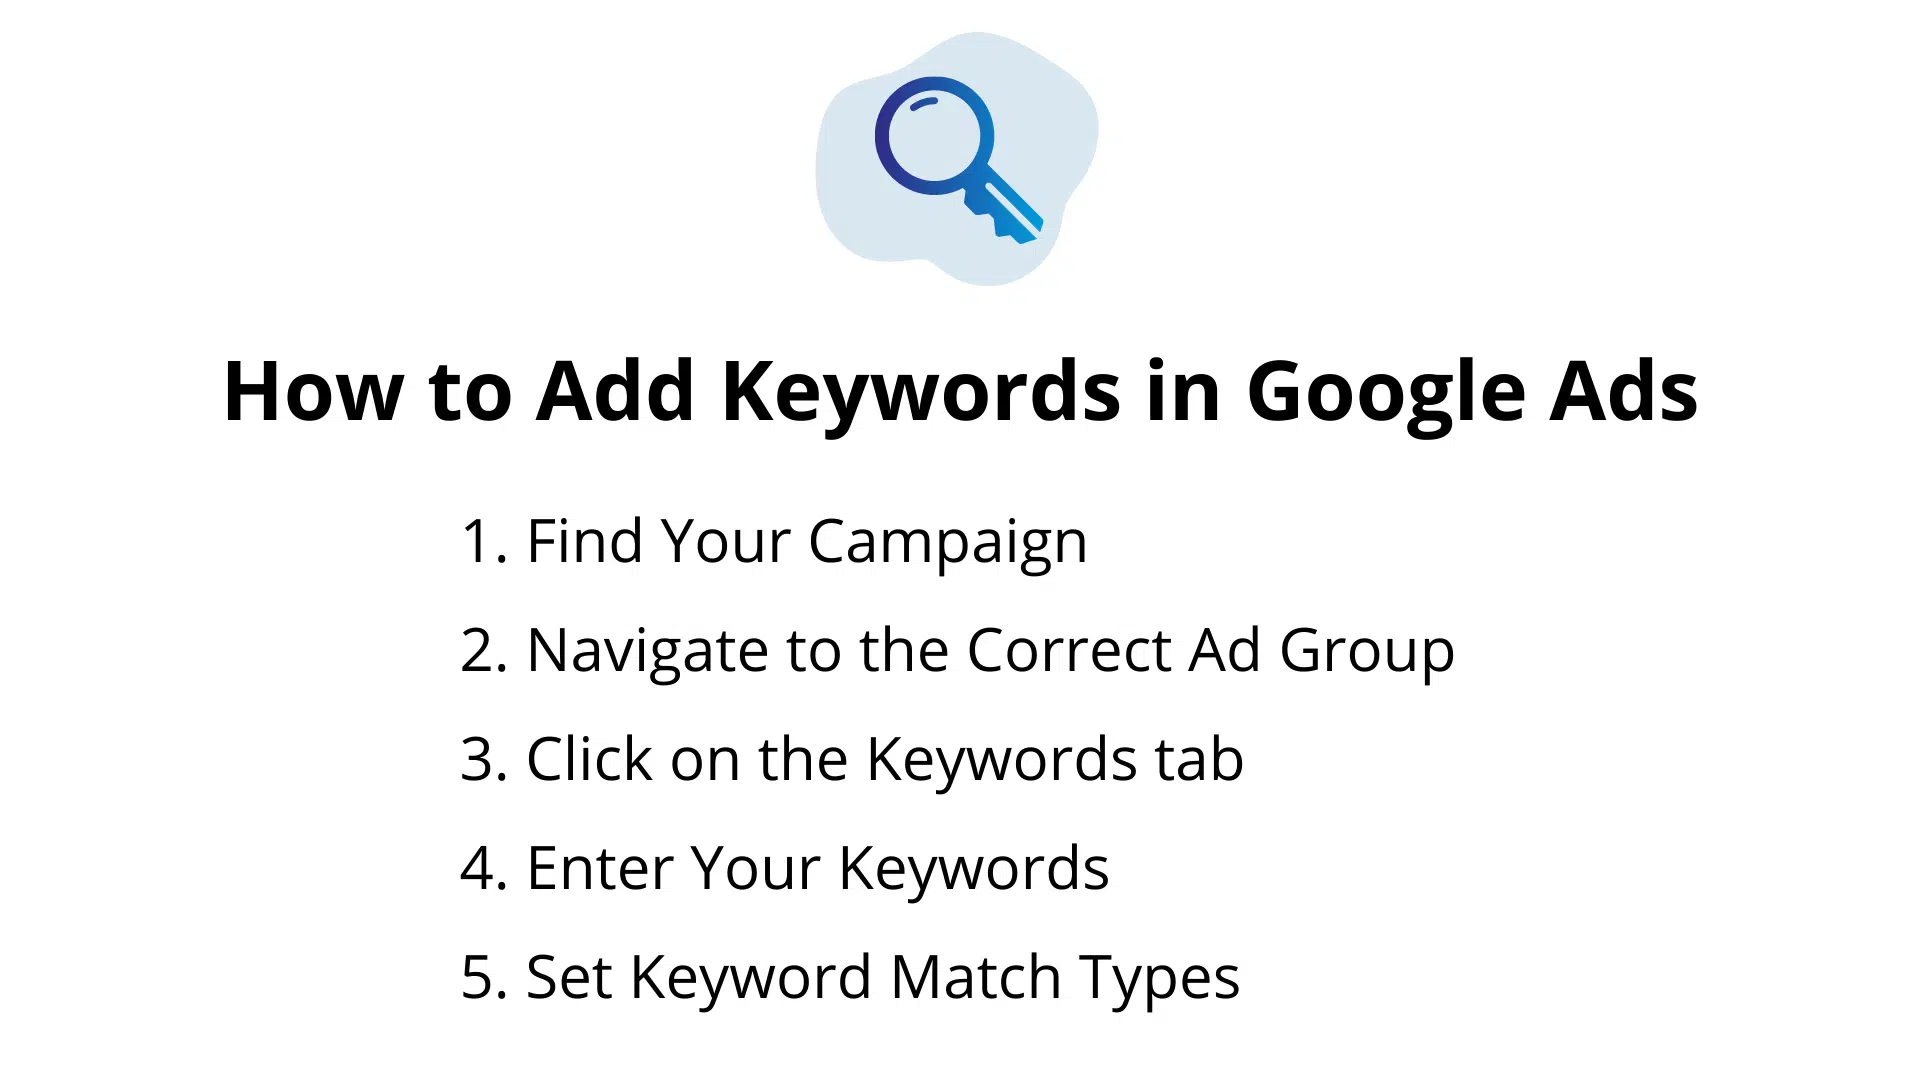 How to Add Keywords in Google Ads